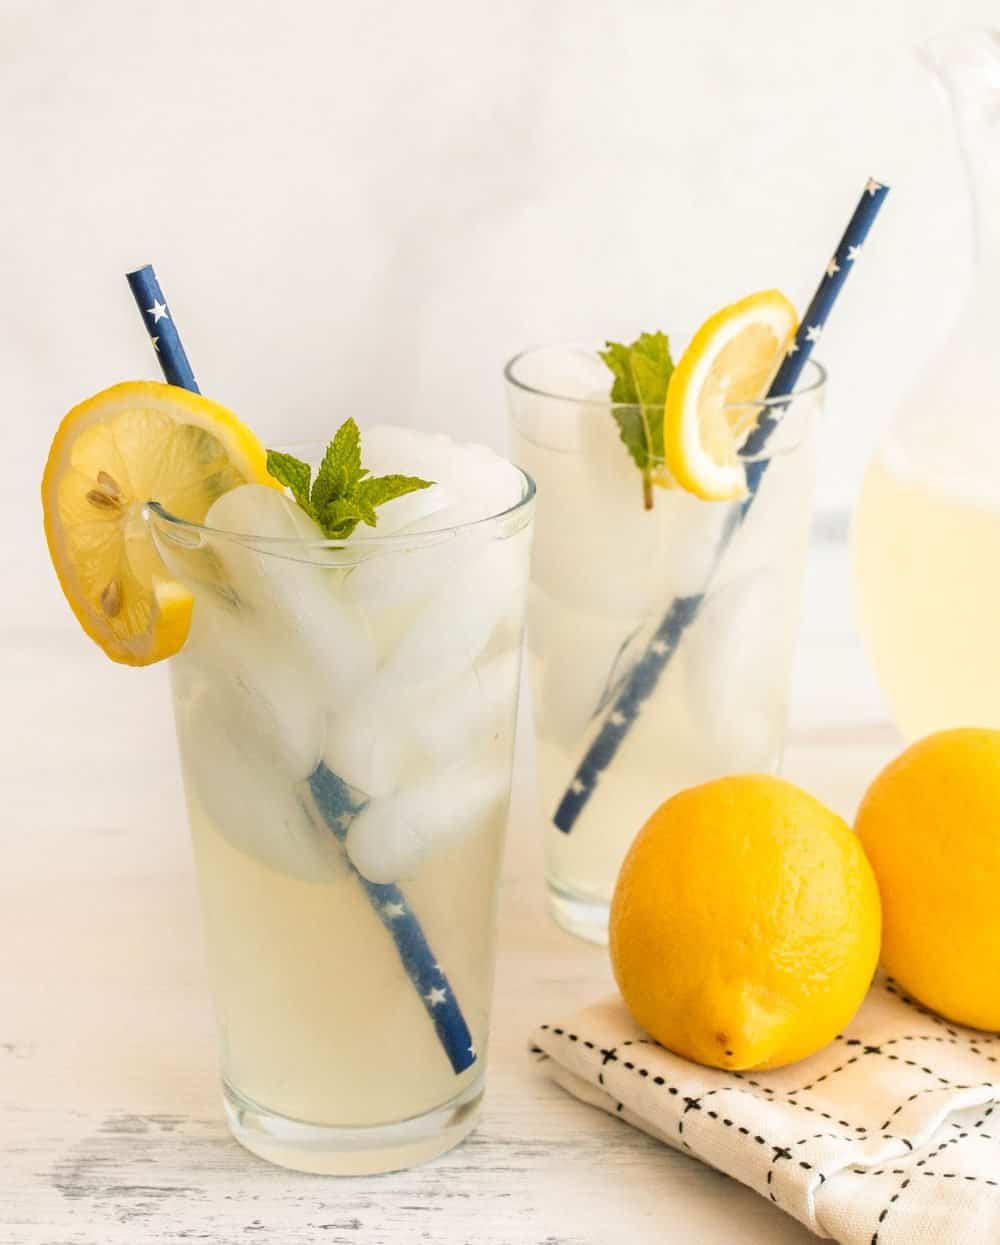 two glasses of lemonade with blue straws, ice, and a lemon and mint garnish